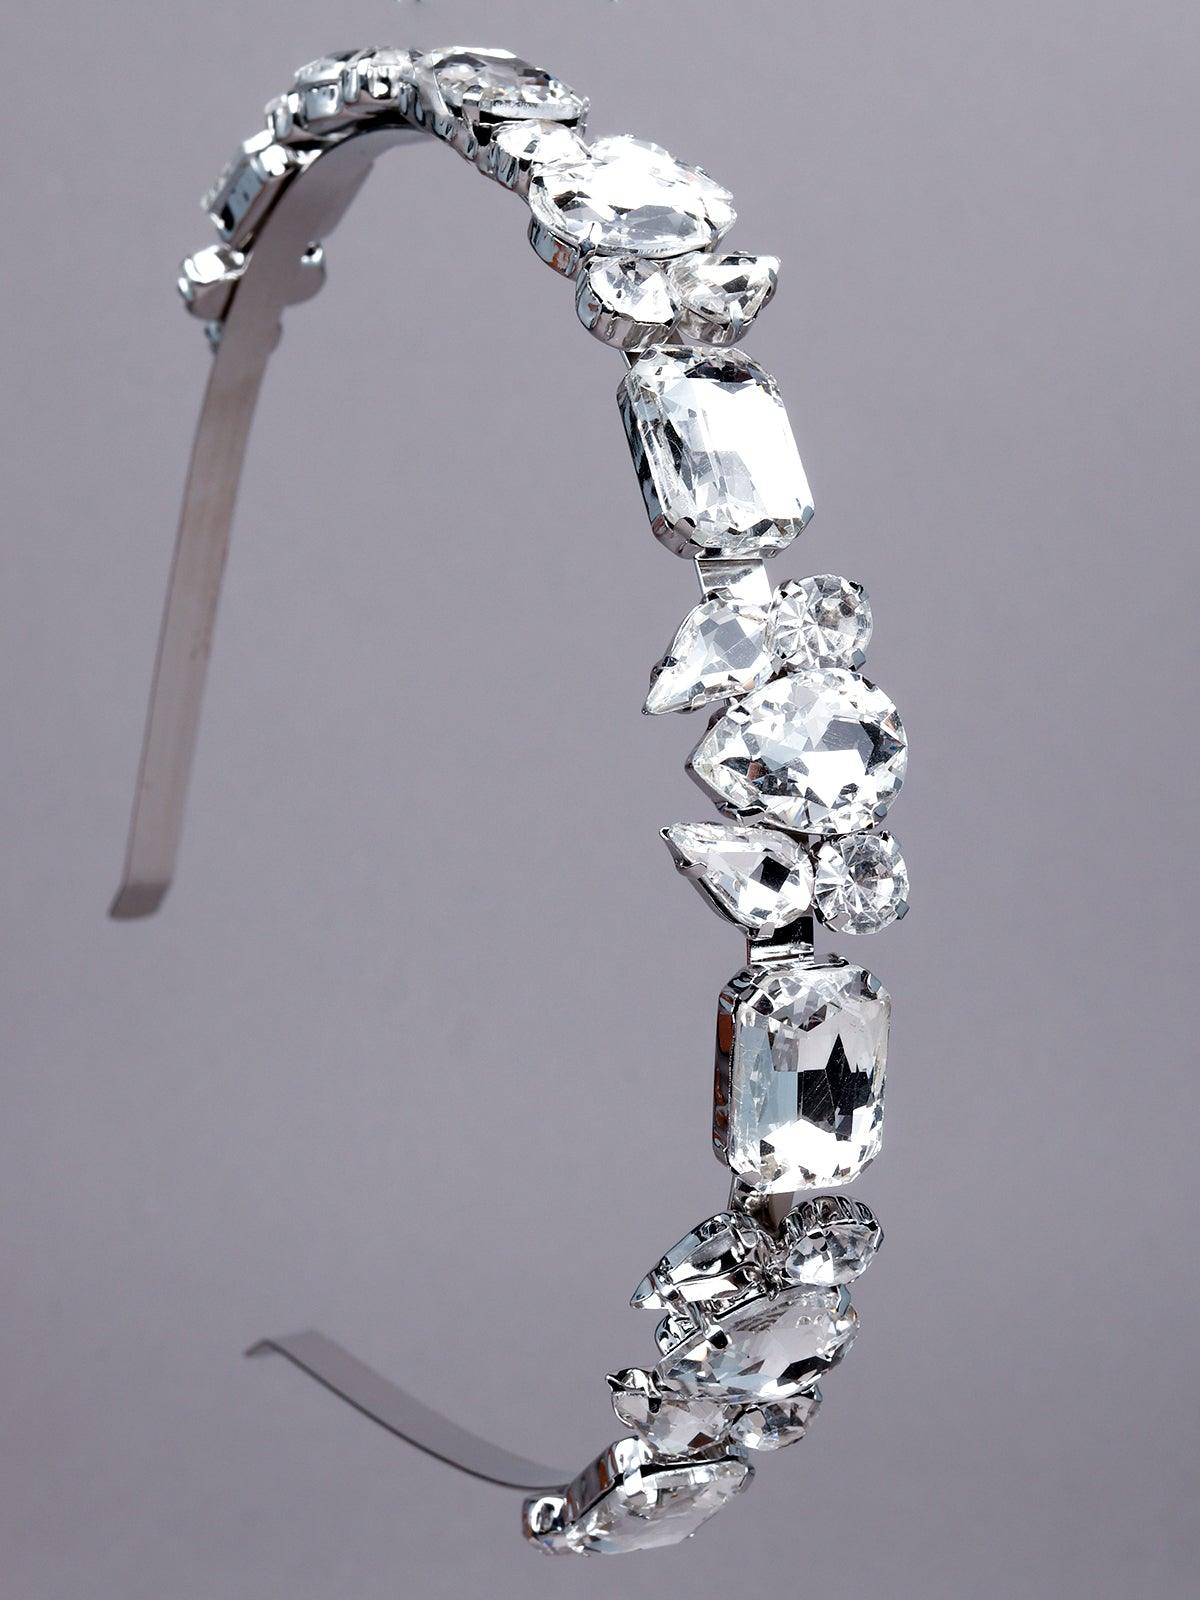 Jewelled Crystal-Studded Fancy Hairband-Silver - Odette